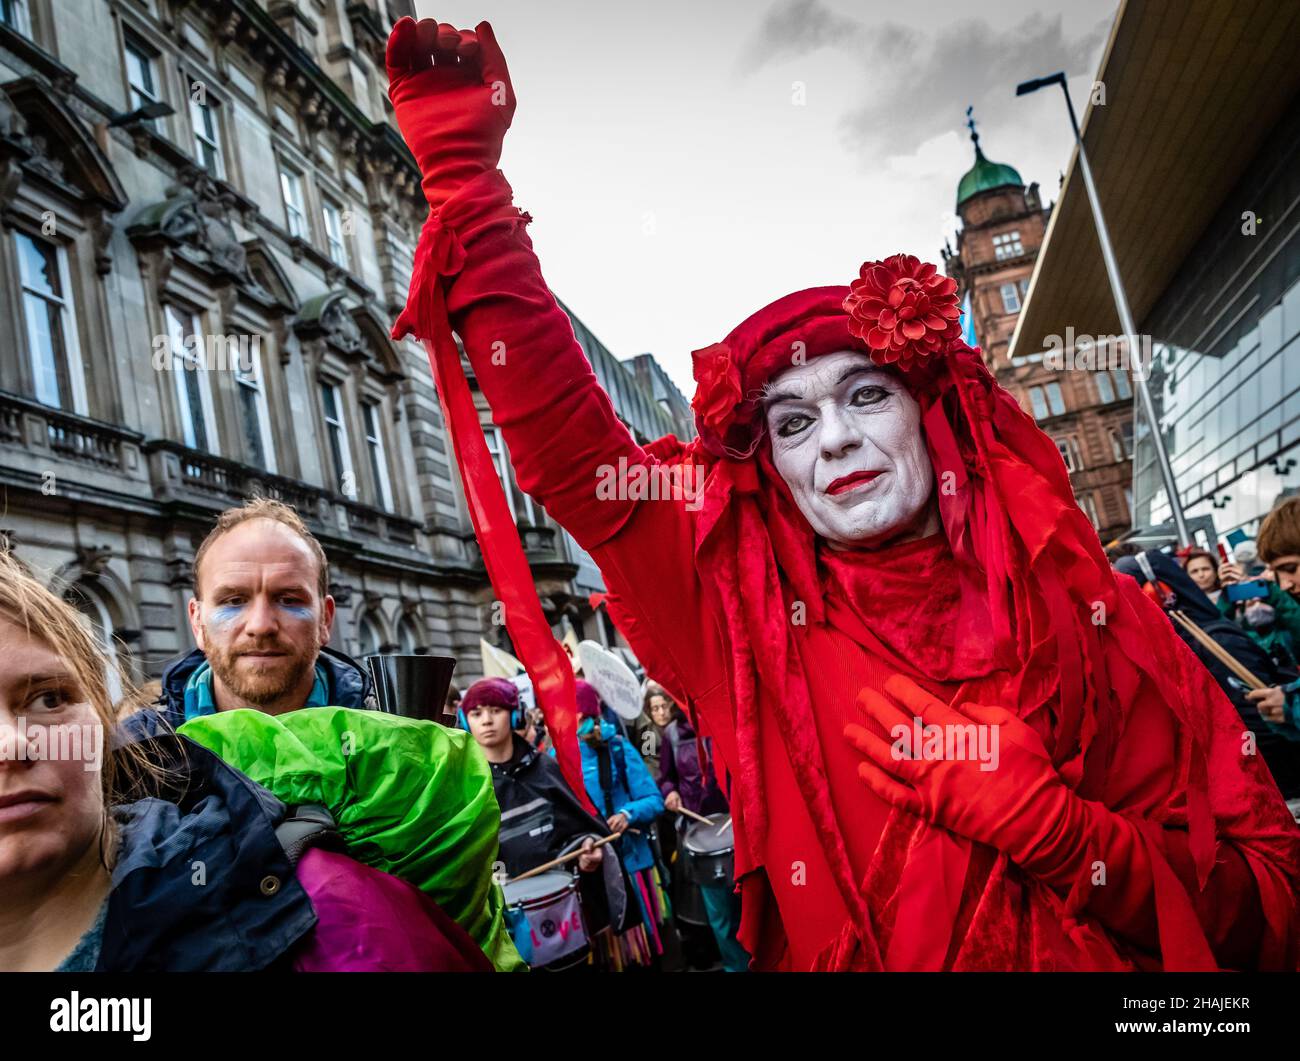 Red Rebel Brigade. Global Day of Action for Climate Justice COP26 Glasgow, Scotland, UK. 100,000 people demonstrated on the 6th November 2021 as part of the Climate Change talks. Stock Photo